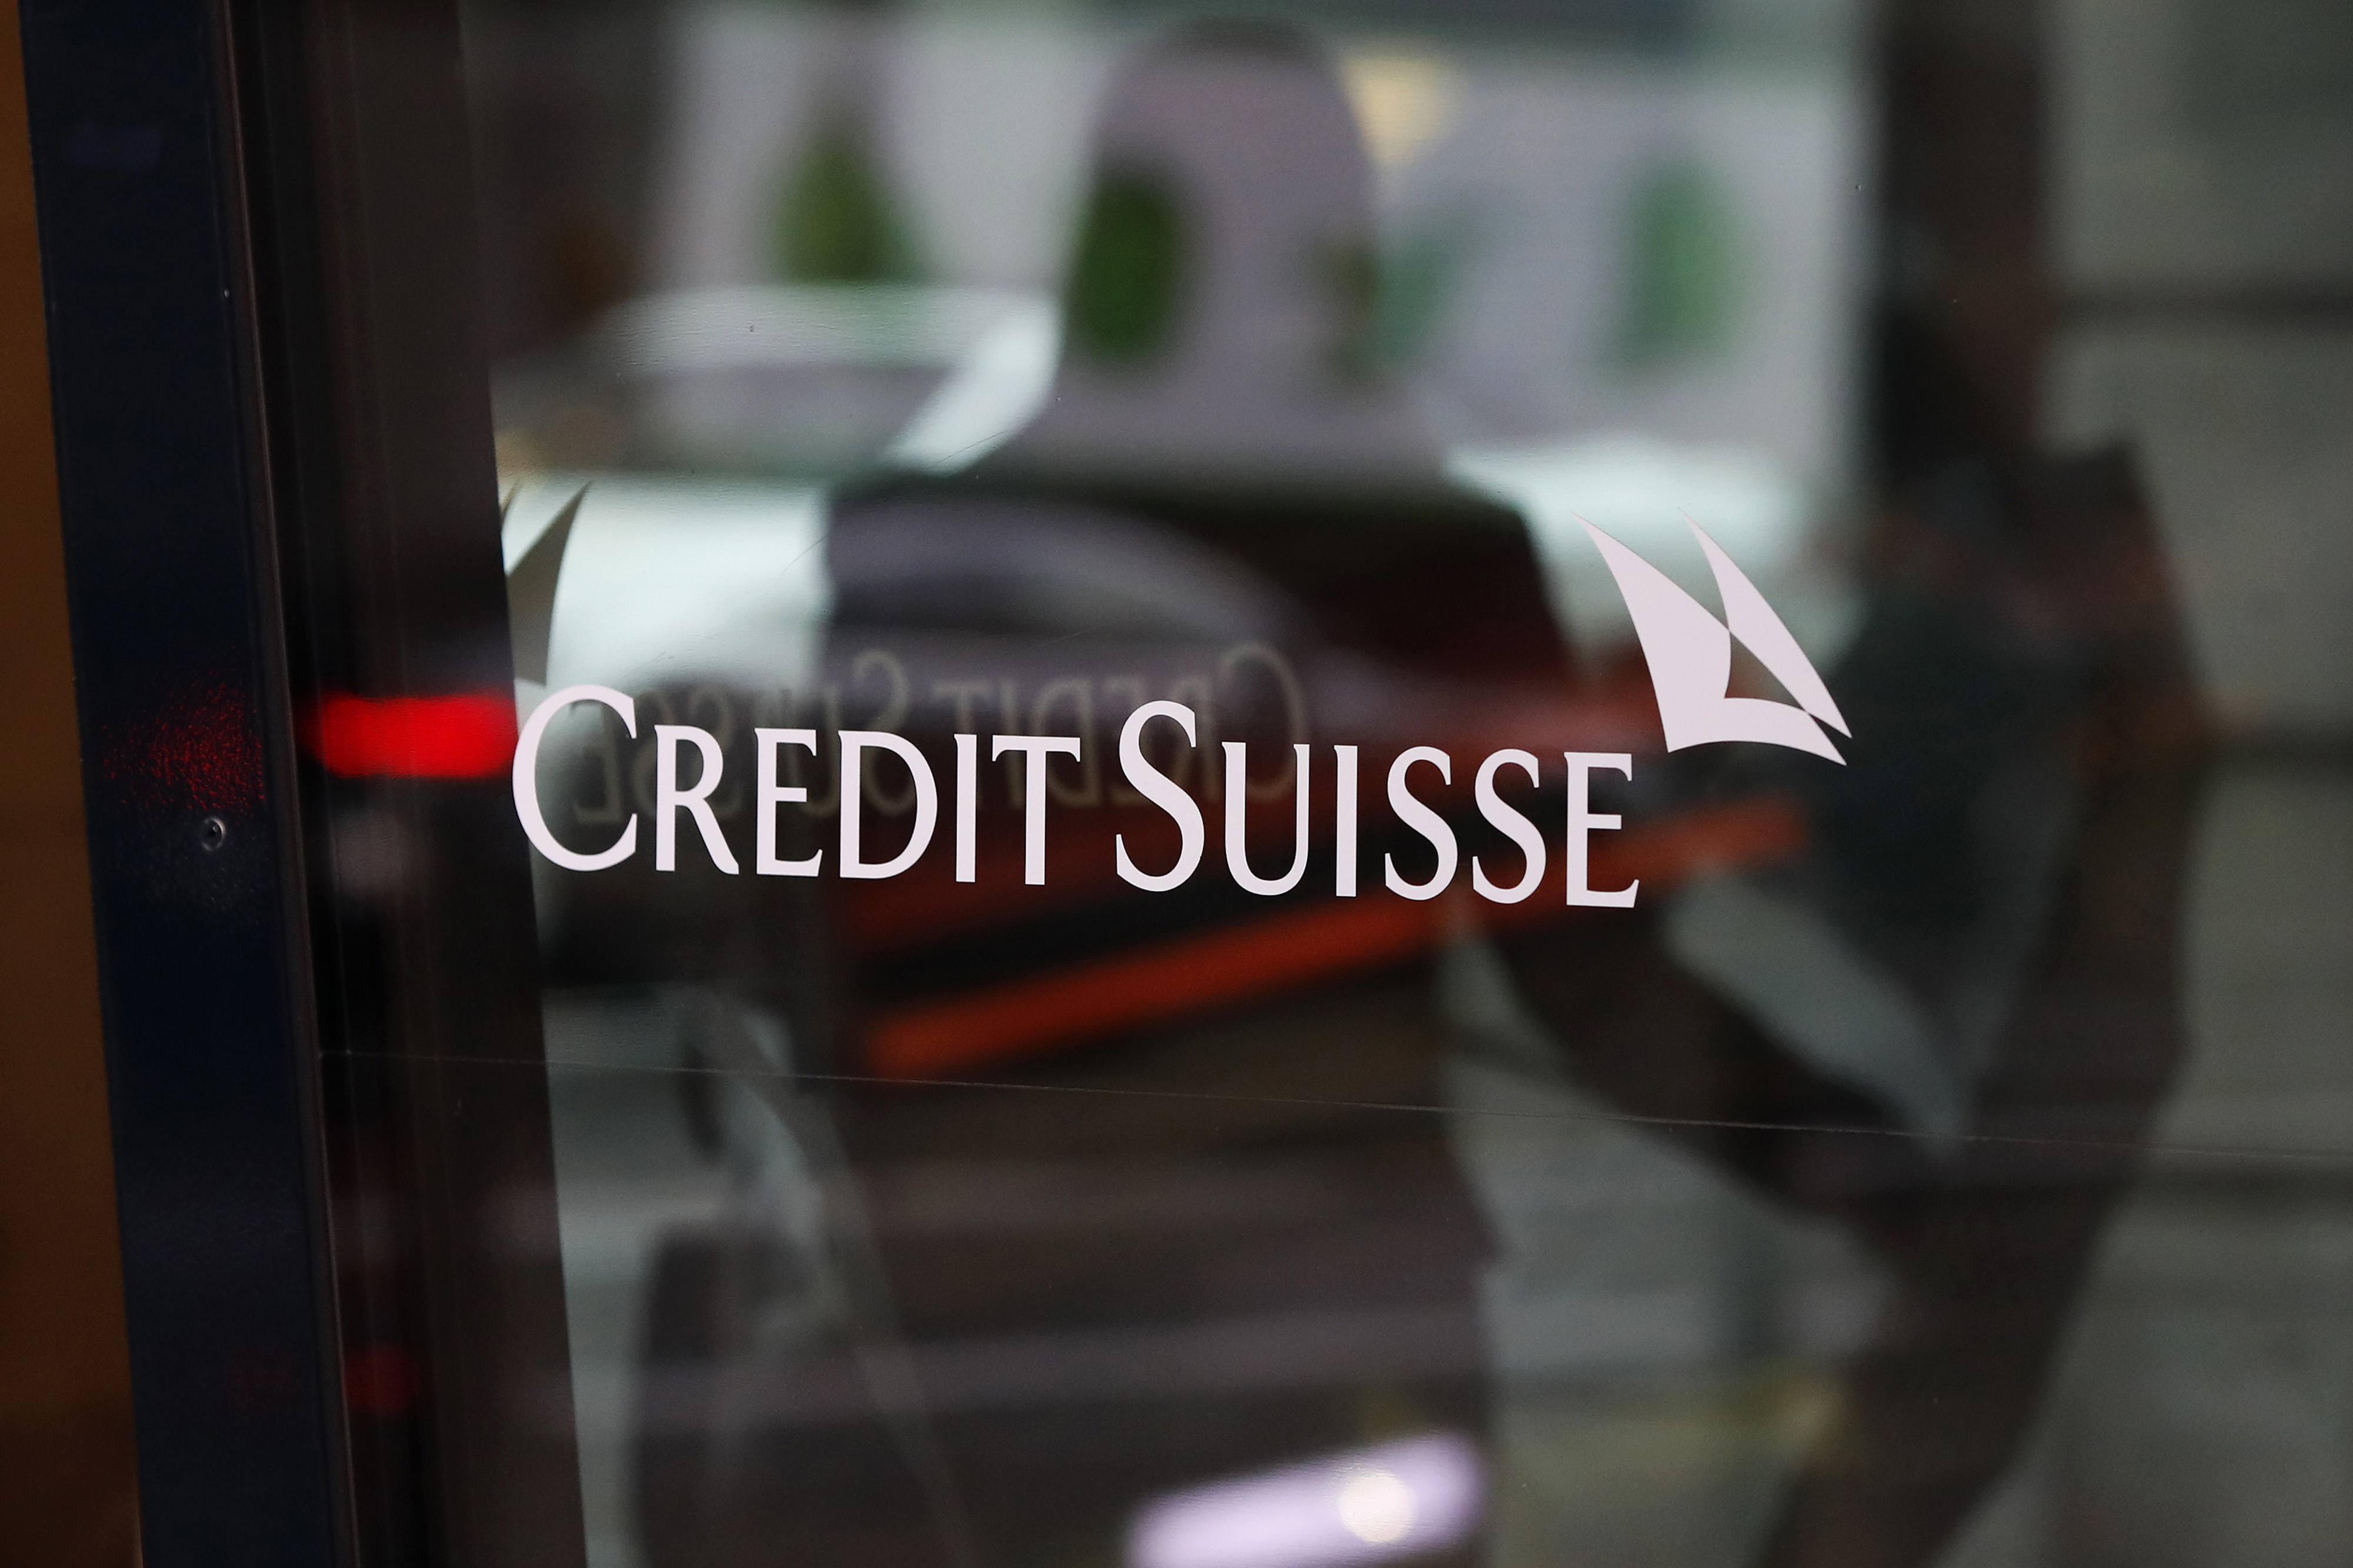 A Credit Suisse logo is displayed at entrance to a Credit Suisse Group AG bank branch in Zurich.